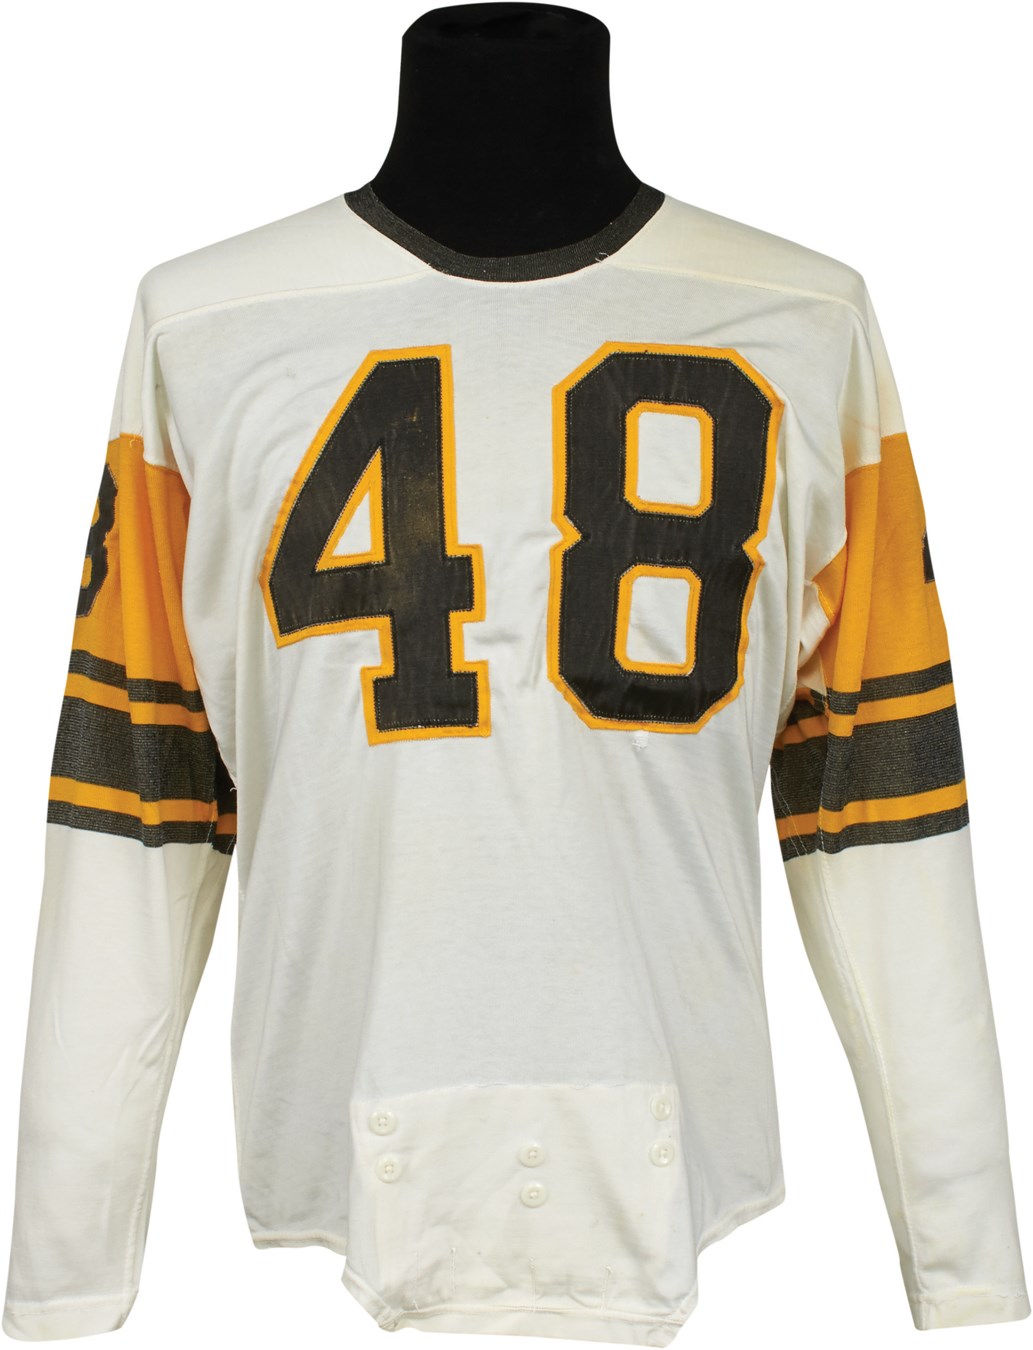 The Pittsburgh Steelers Game Worn Jersey Archive - 1962 Gary Ballman Pittsburgh Steelers Game Worn Jersey